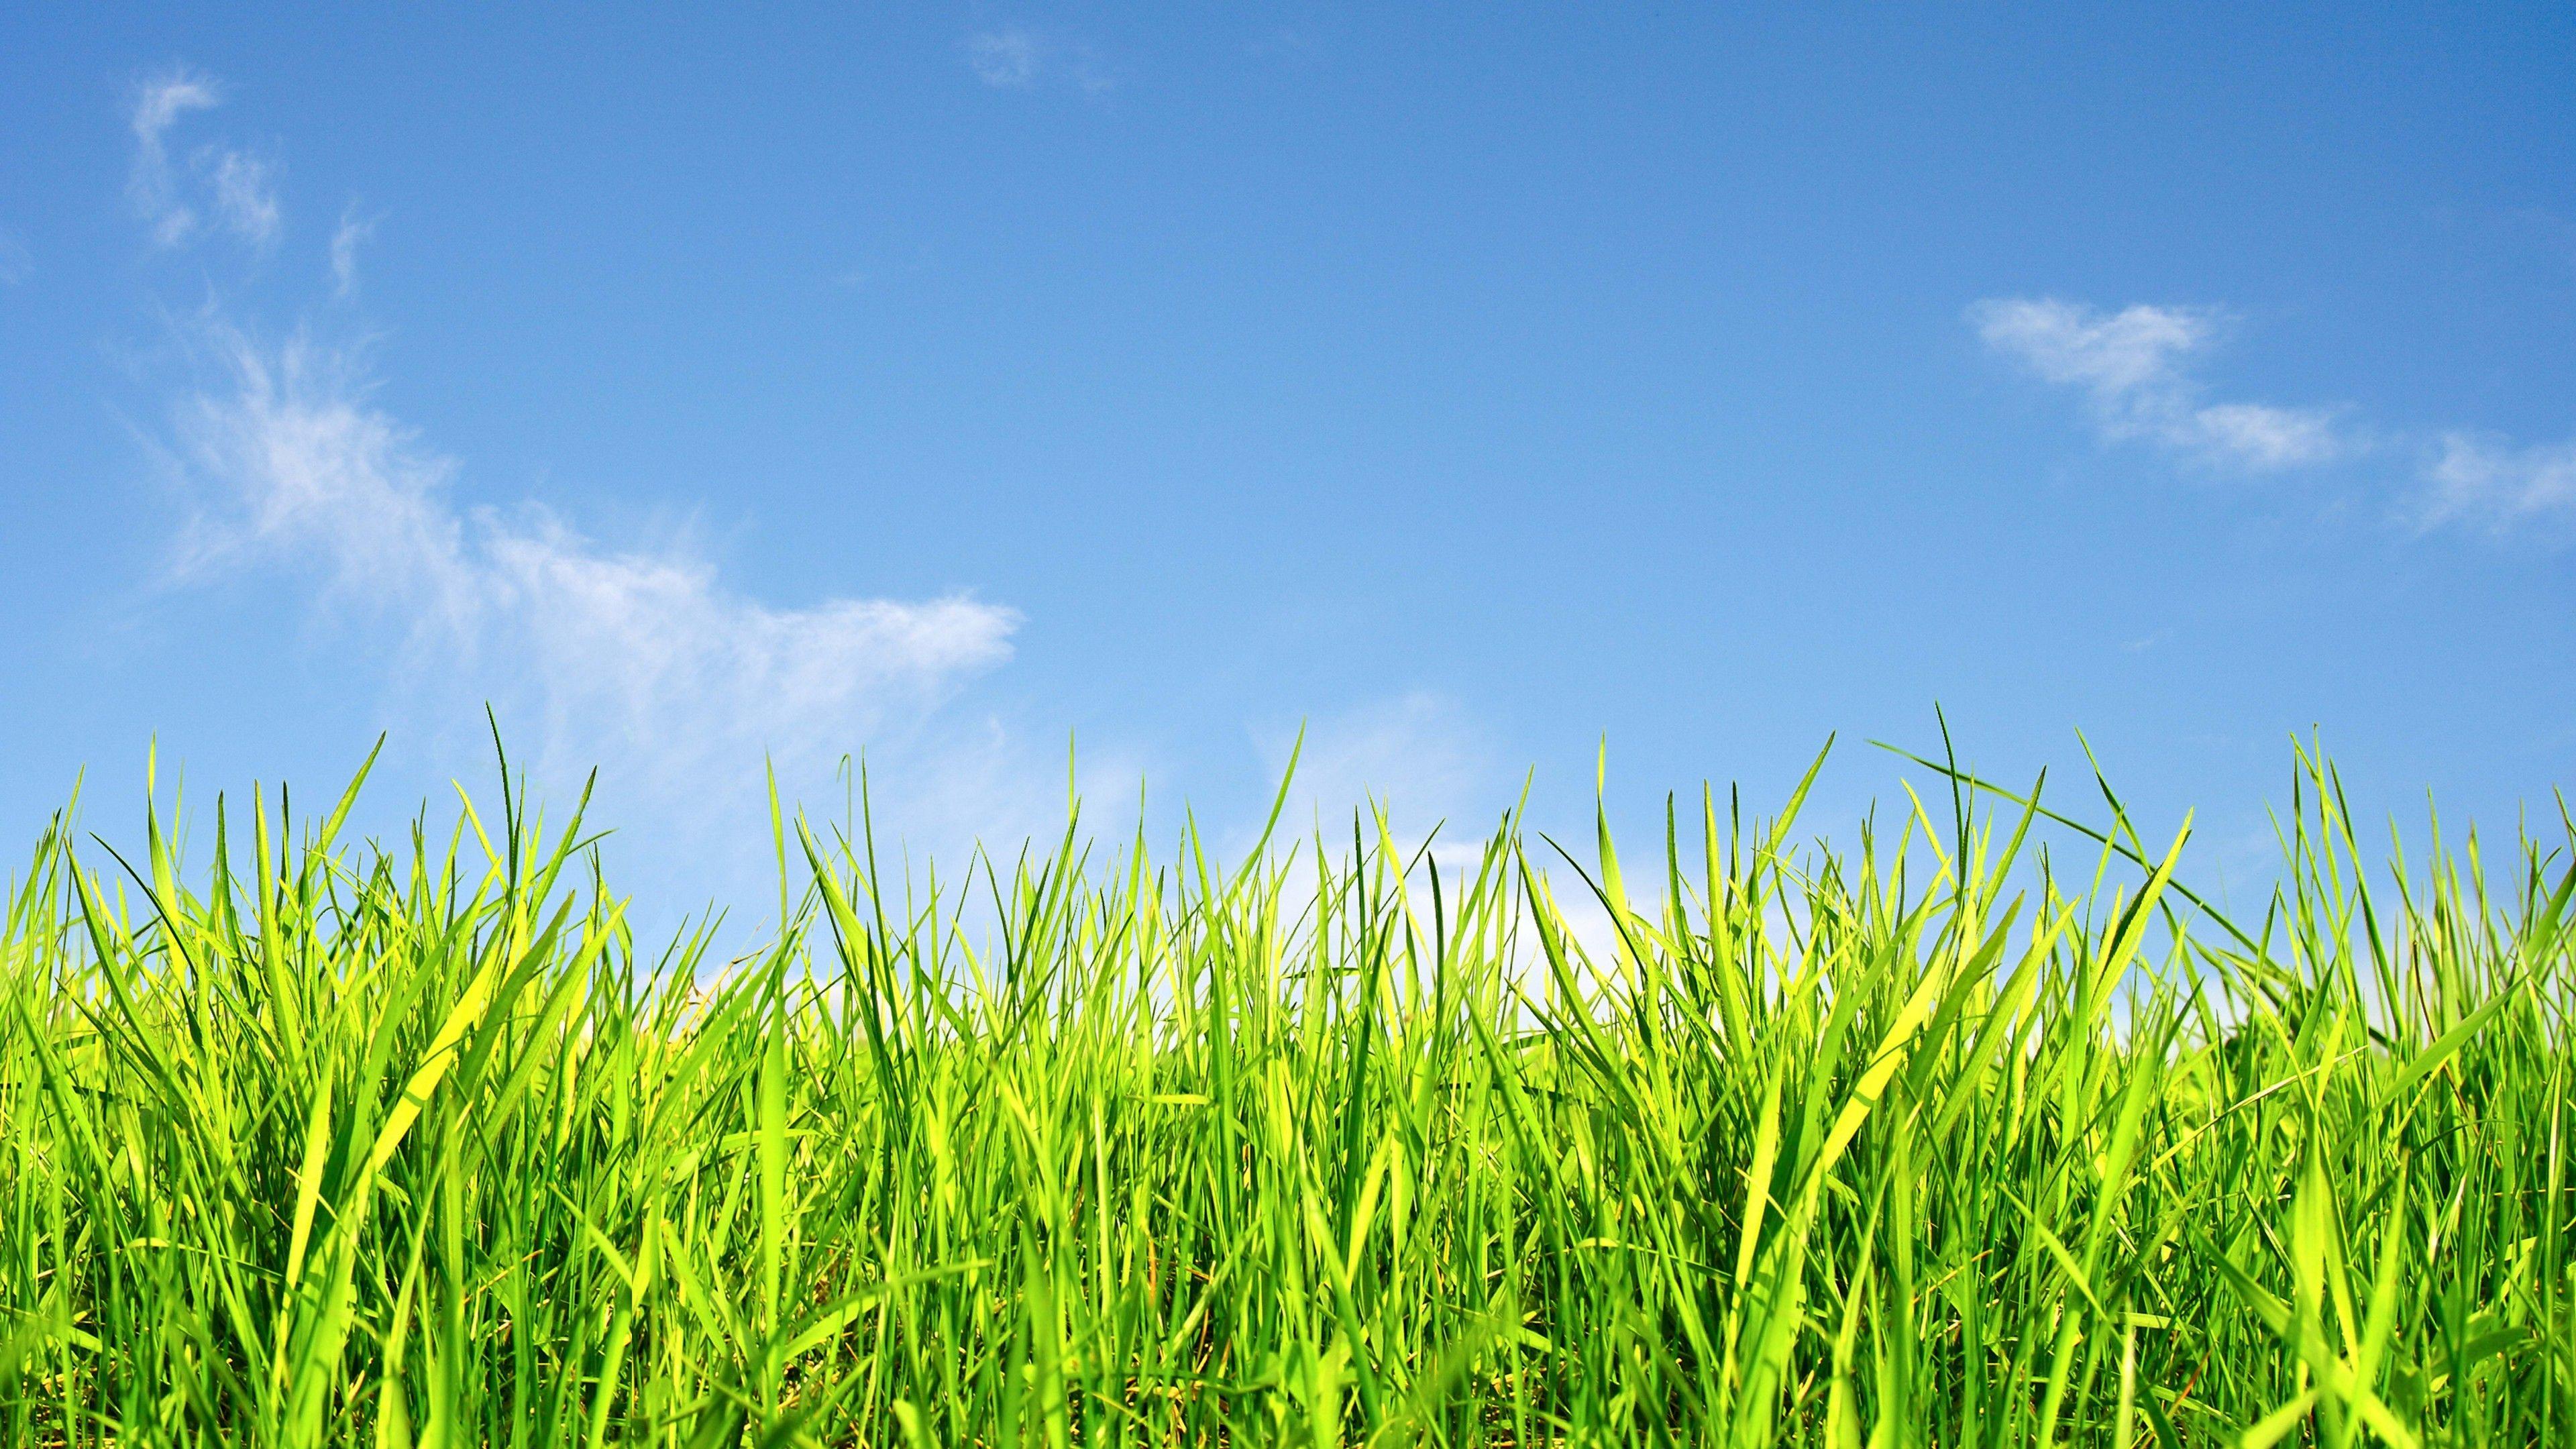 Sky and Grass Wallpapers - Top Free Sky and Grass Backgrounds